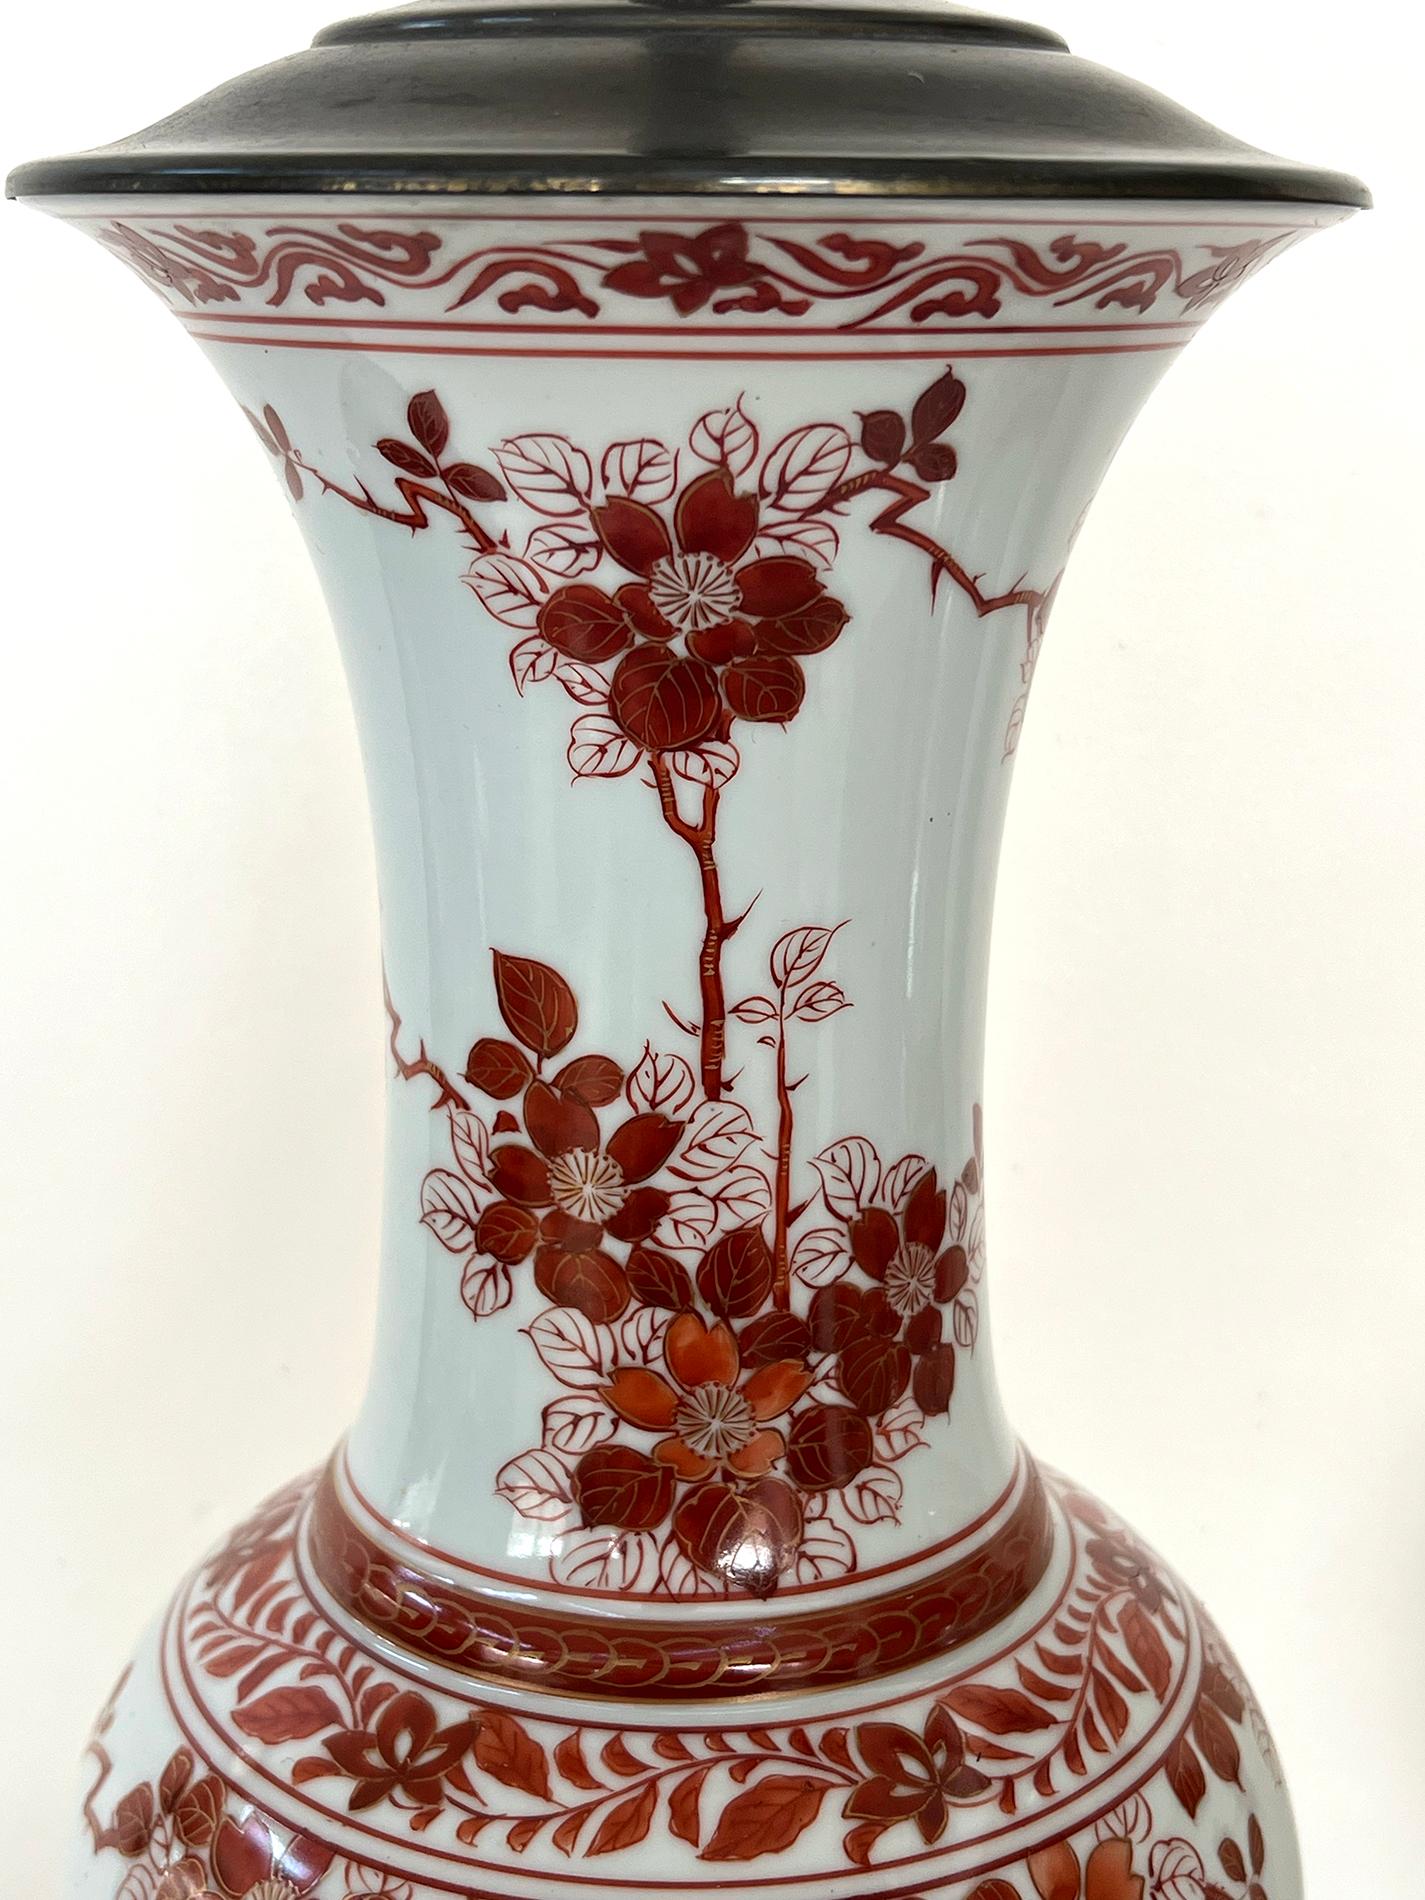 each of shapely baluster form with flaring neck above a bulbous body with a flared foot; hand-painted overall with iron-red floral and foliate vines and clusters with flying birds on the rear